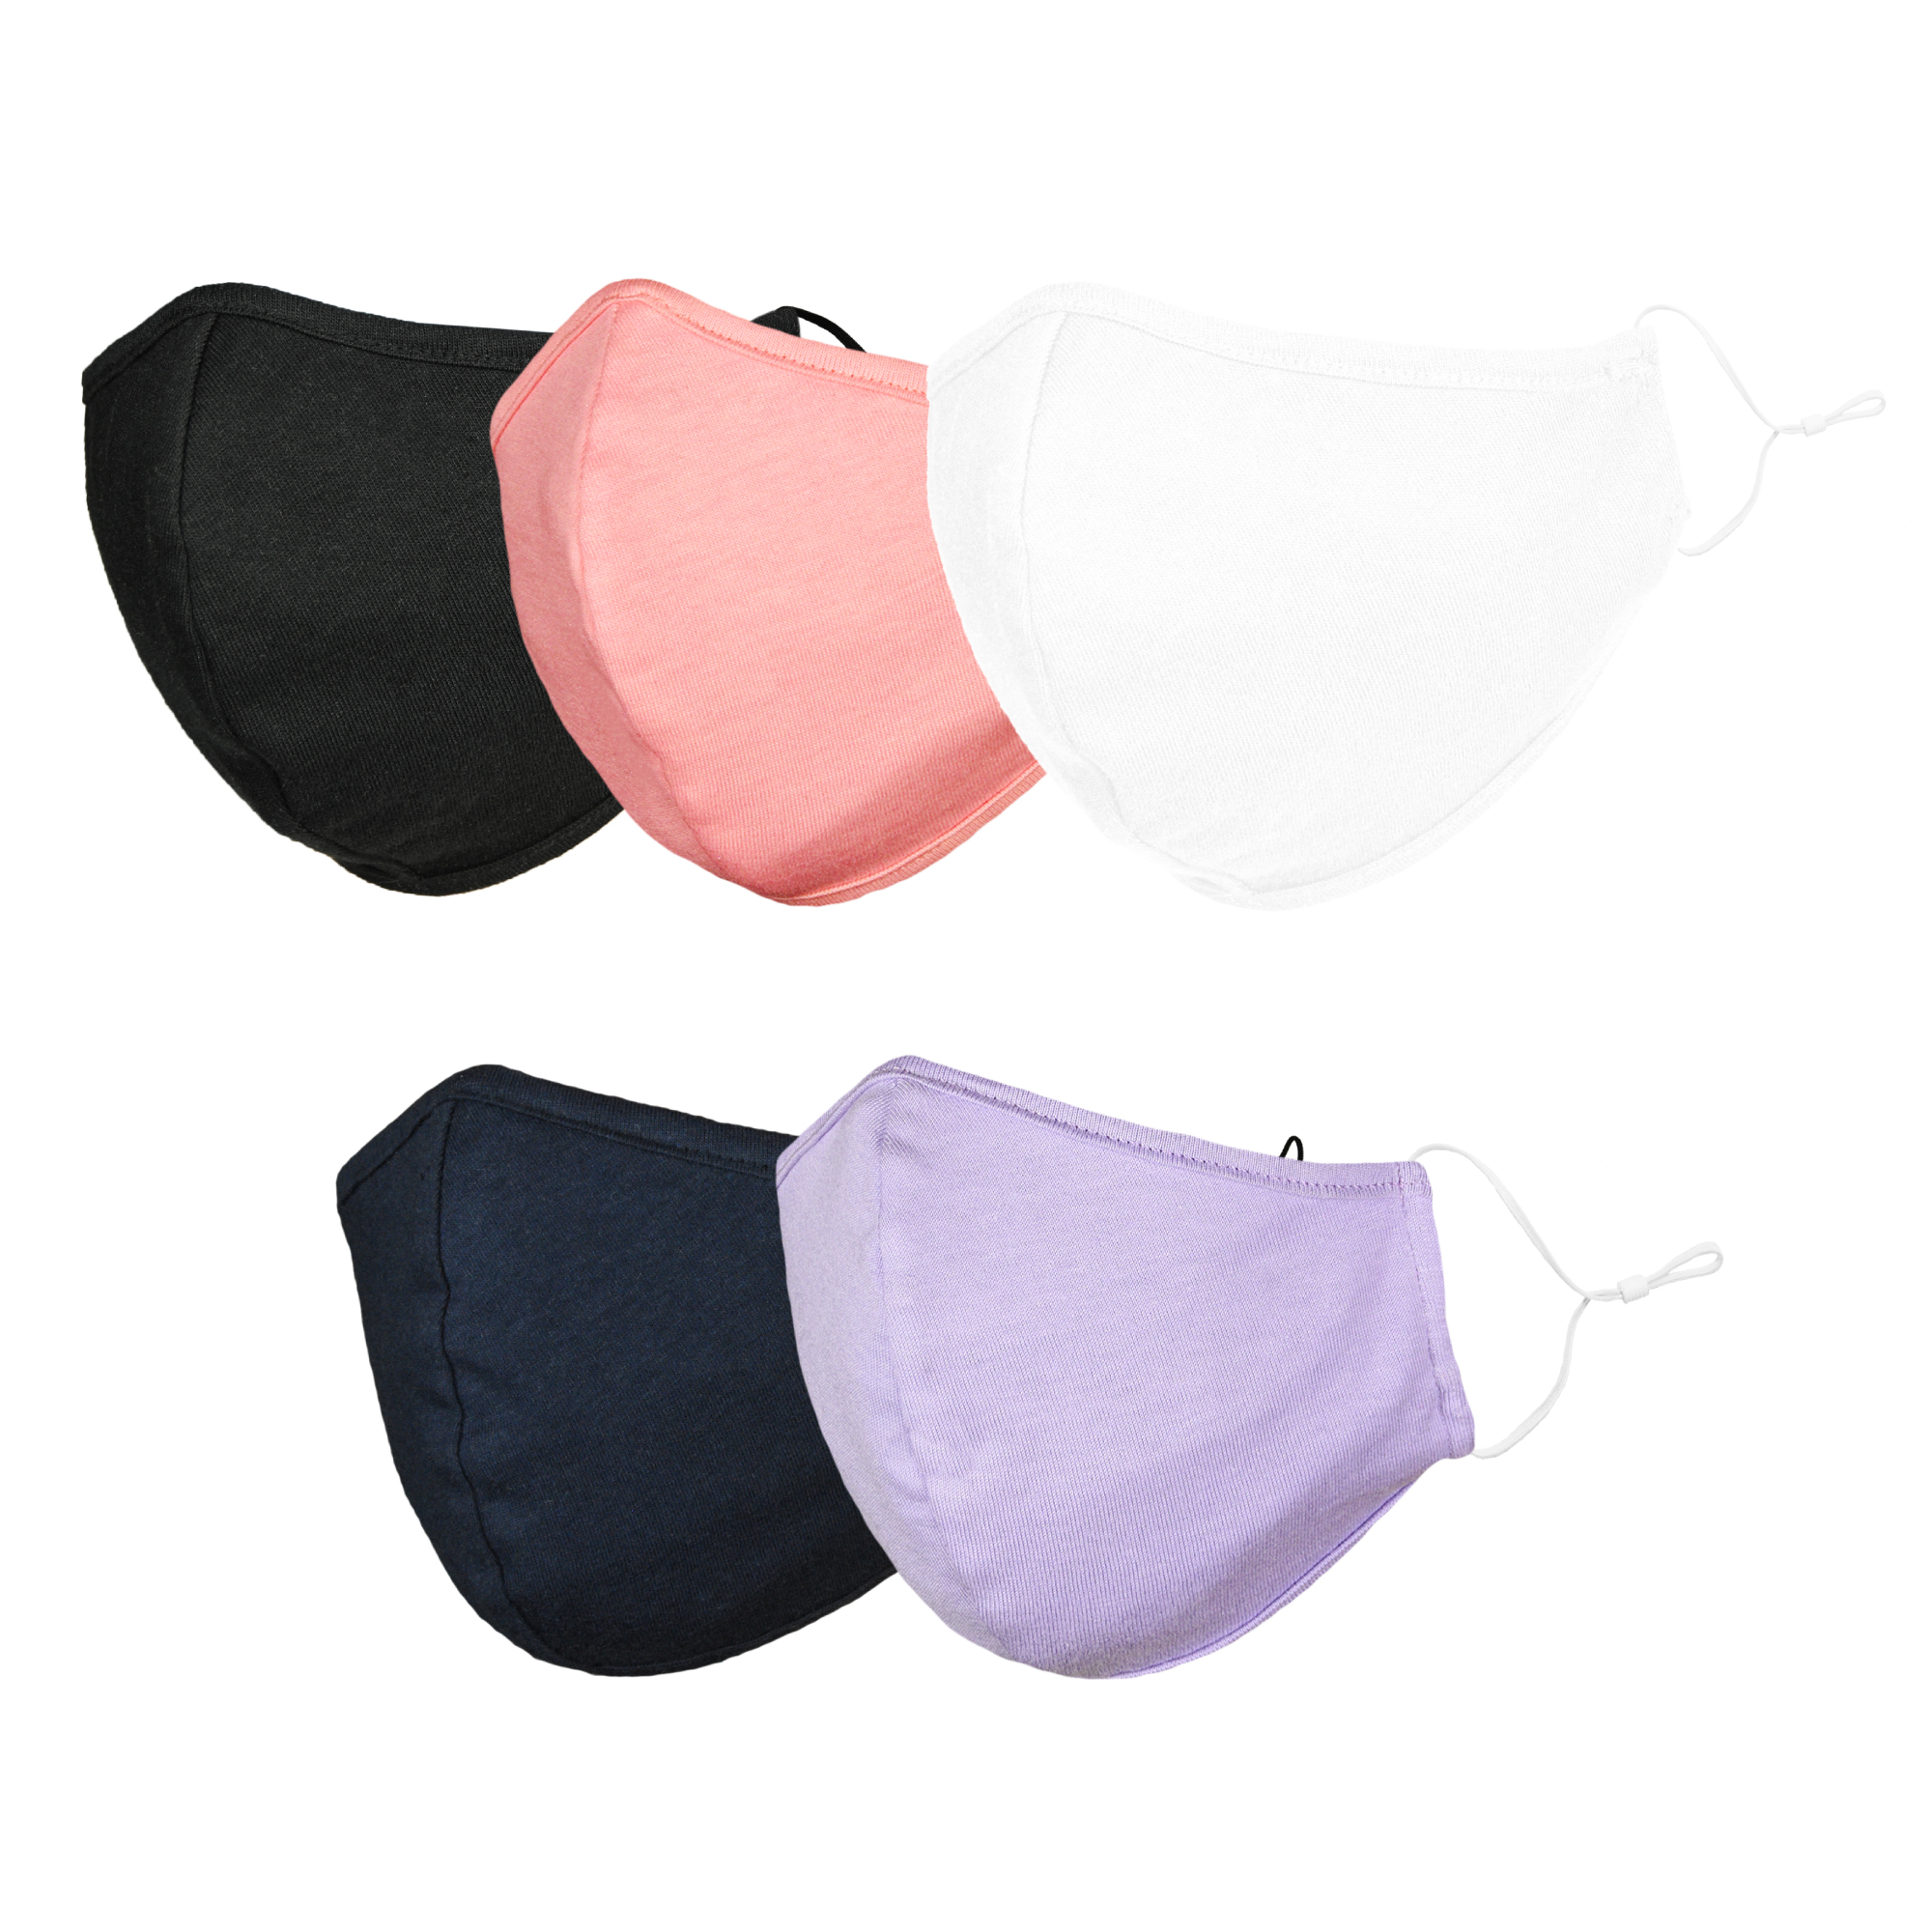 DALIX Cloth Face Mask Reuseable Washable in Assorted Colors Made in USA  (5 Pack) - image 1 of 5